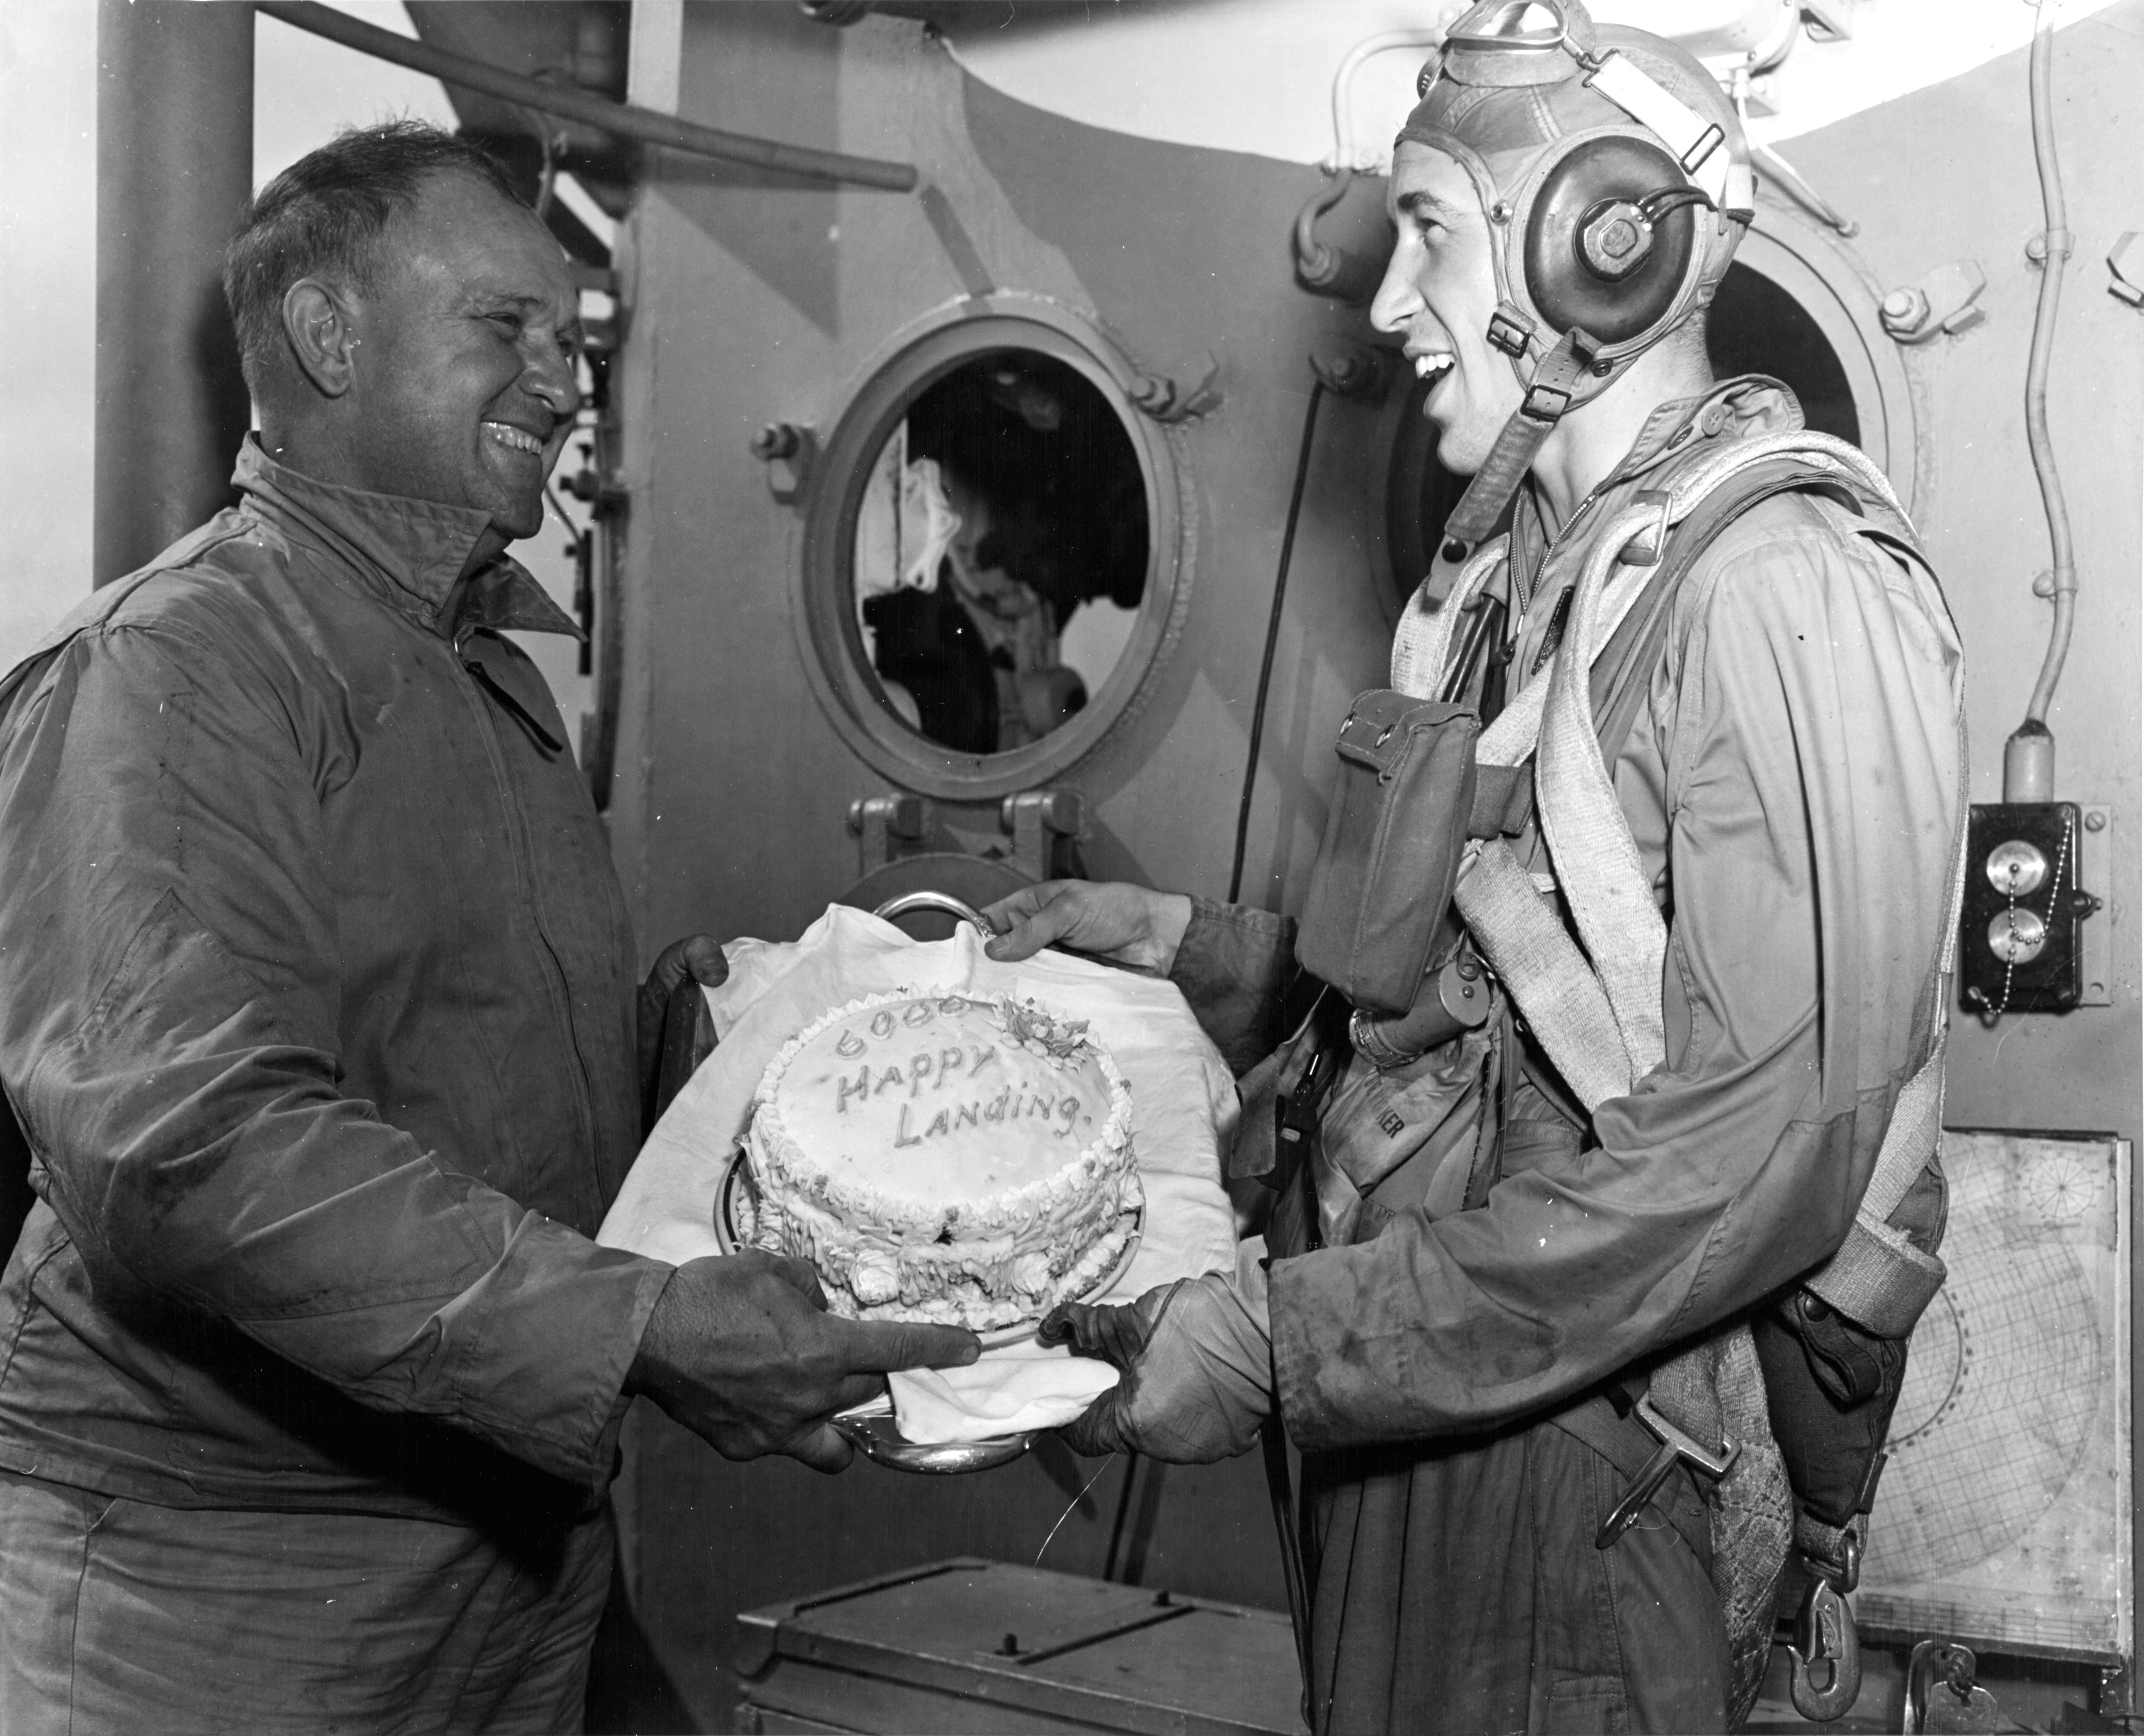 Captain Dixie Kiefer of USS Ticonderoga presenting VT-80 pilot Clyde Grow a cake for making the 6,000th landing on the carrier ('trap'), late 1944